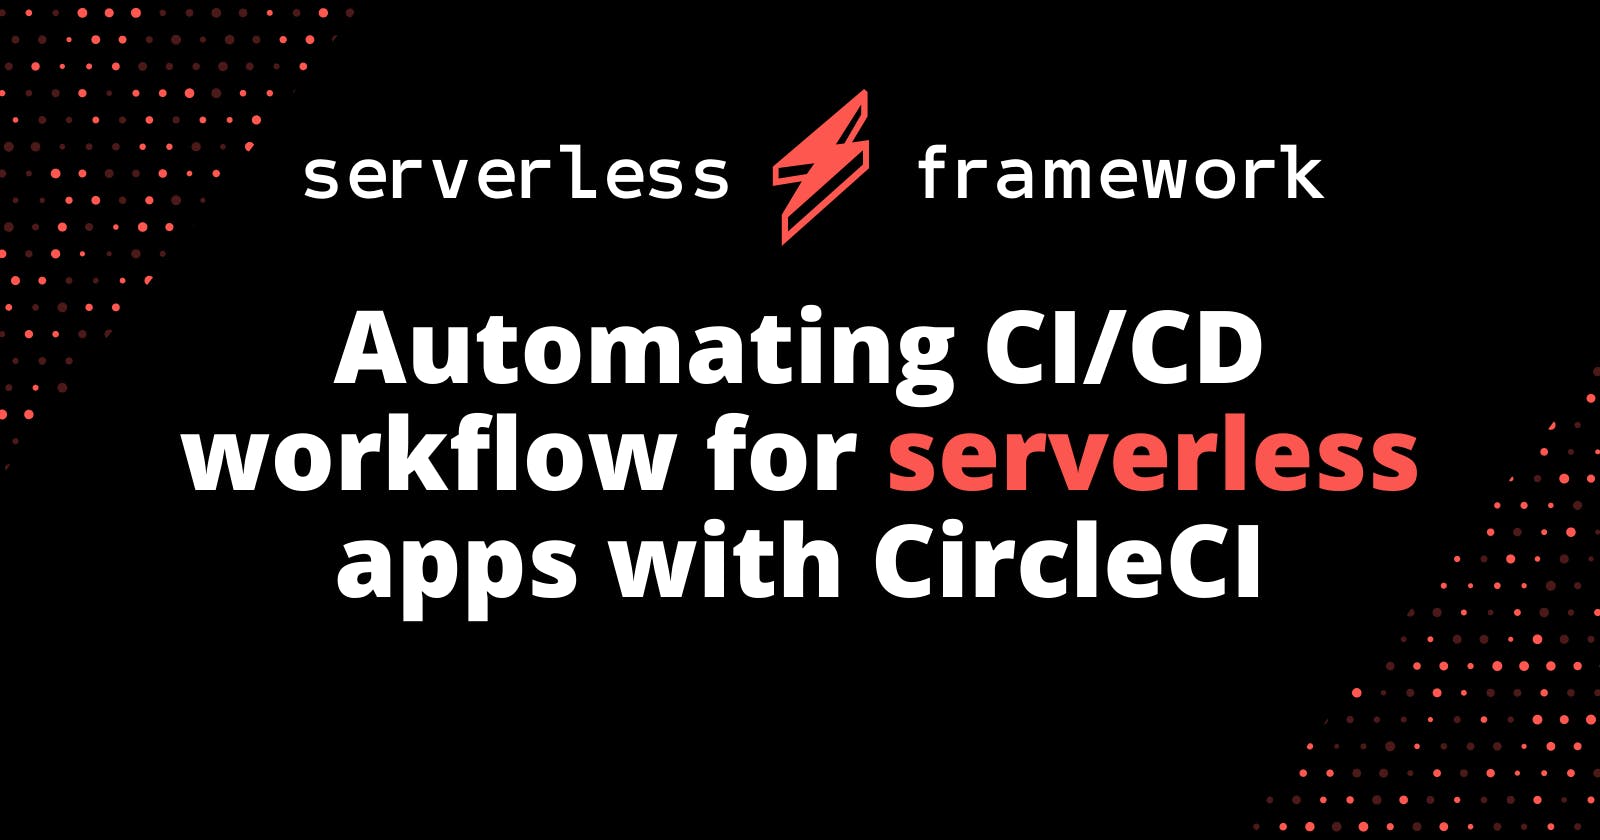 Automating CI/CD workflow for serverless apps with CircleCI